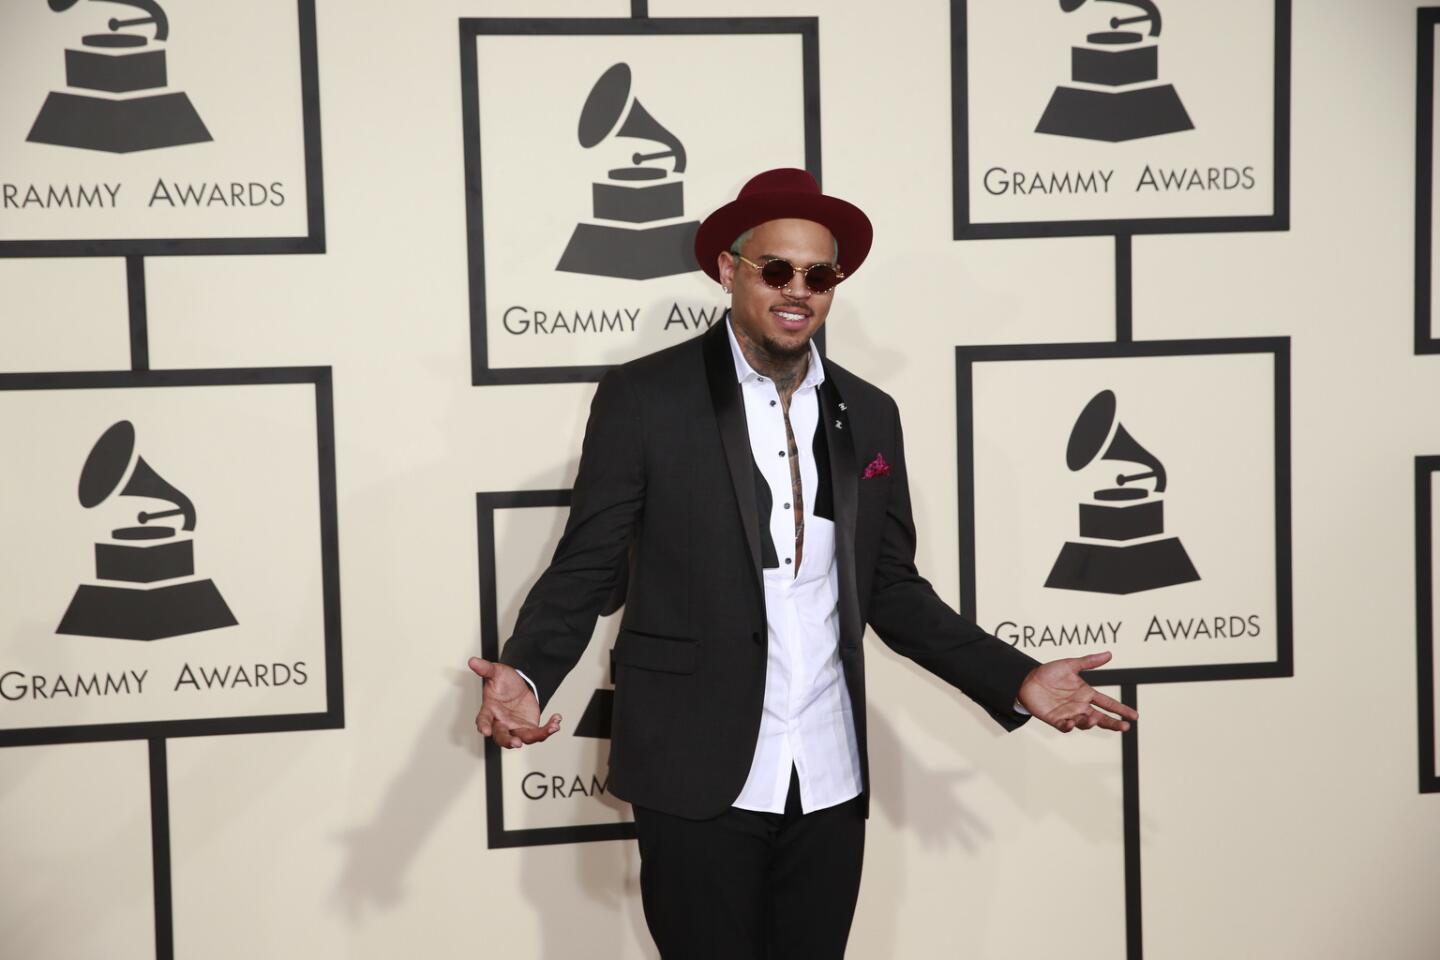 Men's fashions at the Grammys